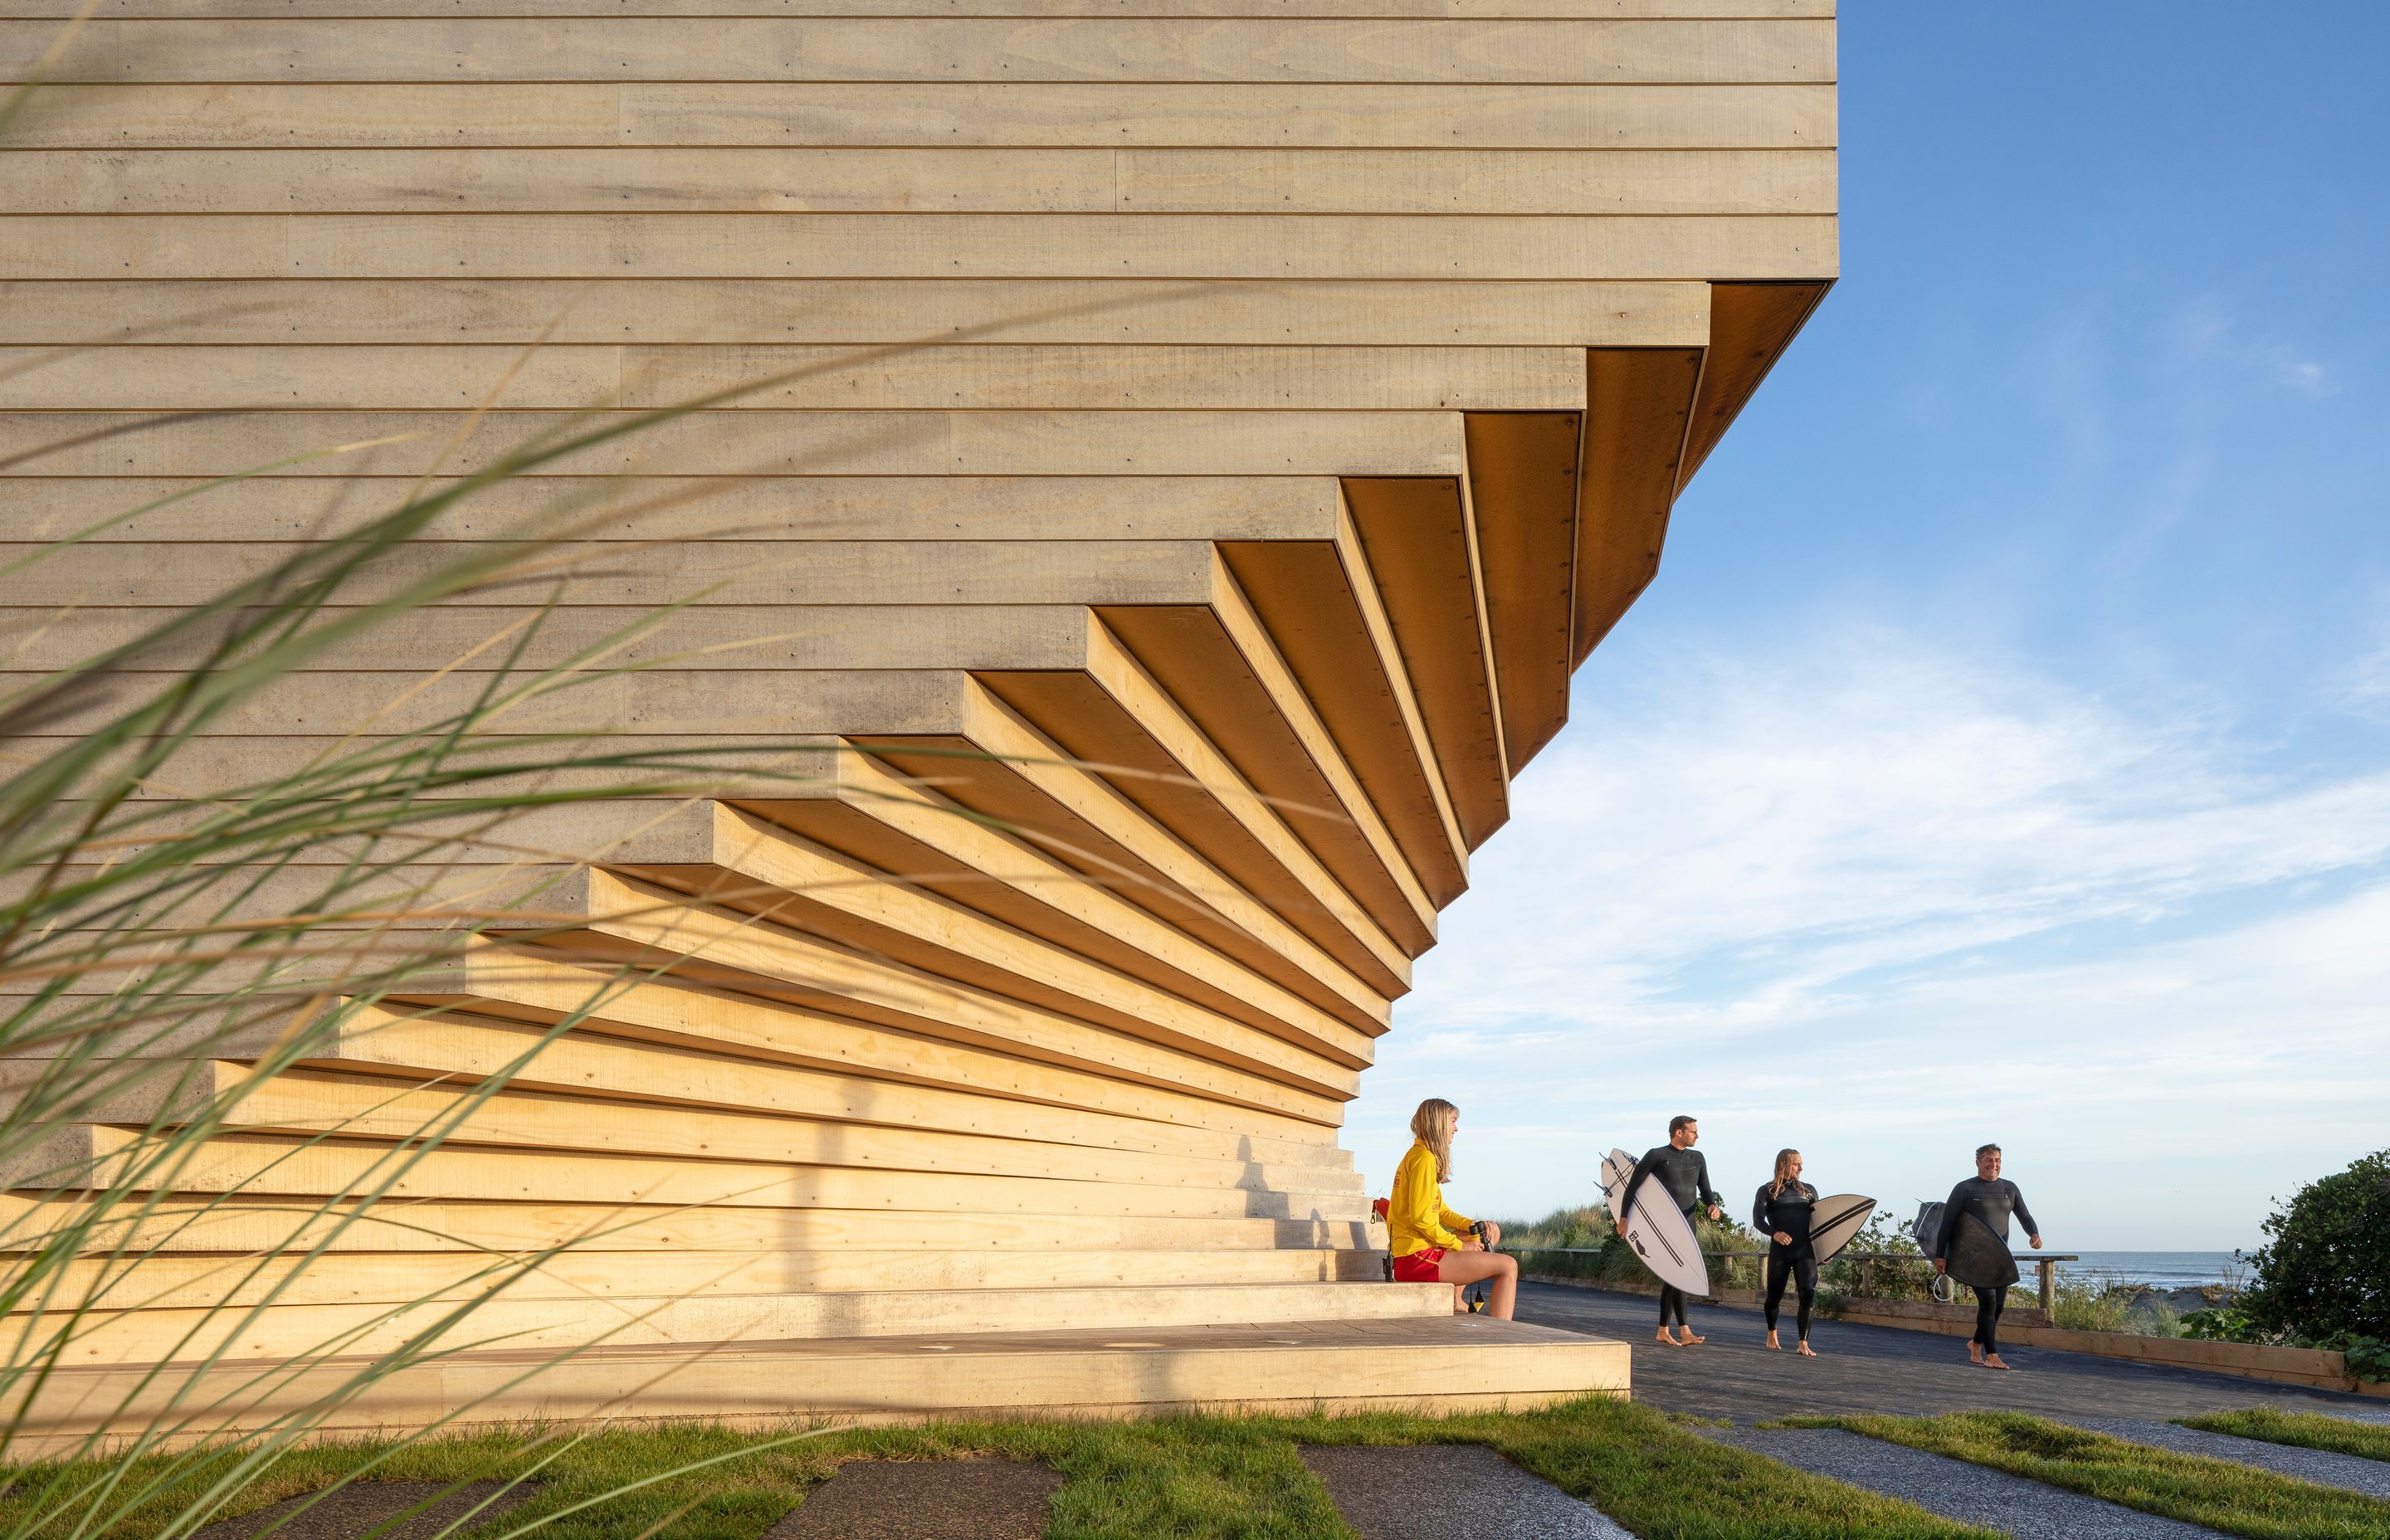 Fanning towards the ocean, the building's architectural form mimics the curves and undulations in the surrounding sand and driftwood.